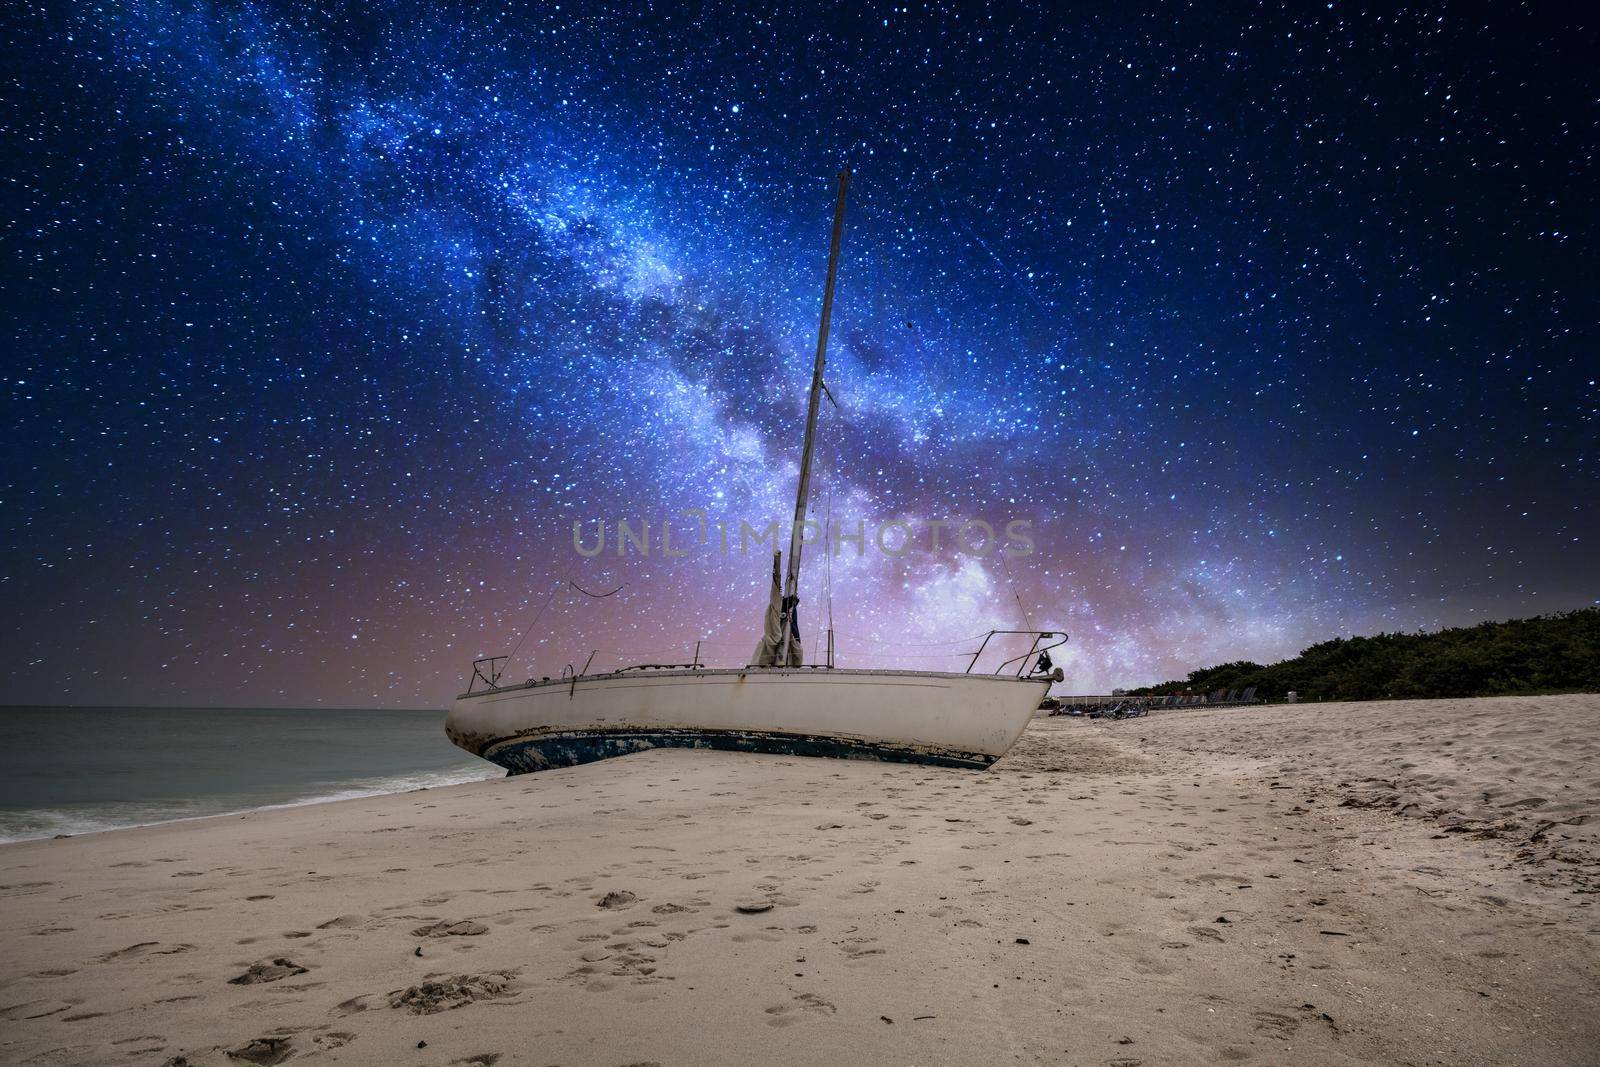 Milky way in the night sky over a shipwreck off the coast of Clam Pass by steffstarr